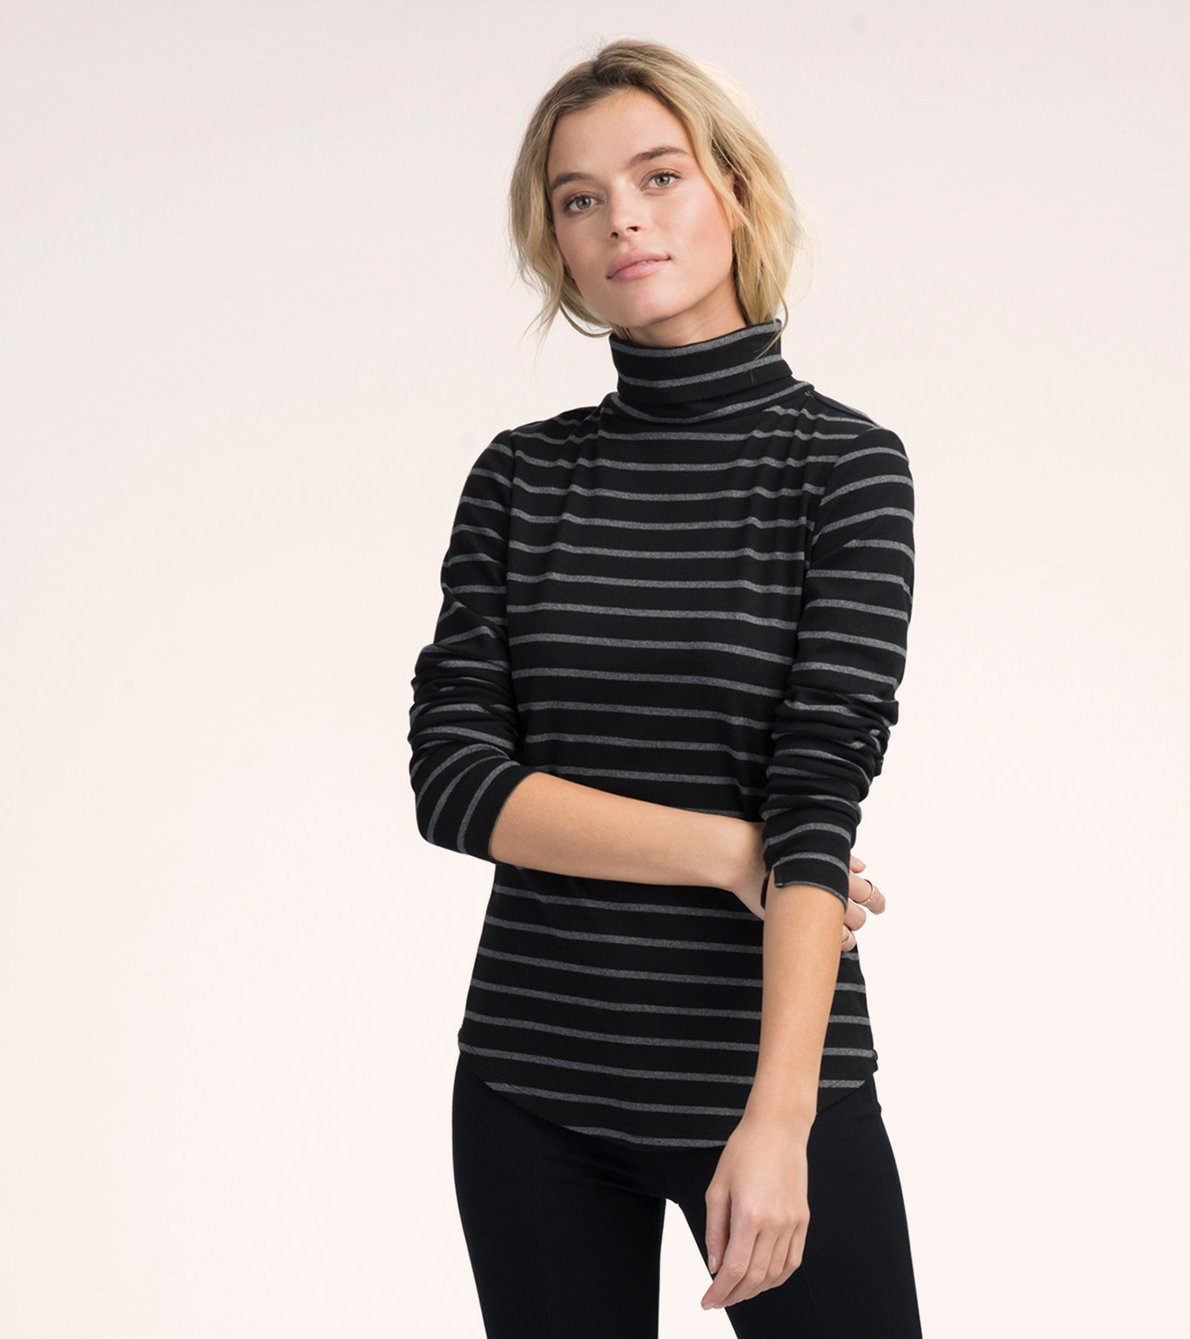 View larger image of Black and Charcoal Stripes Turtleneck